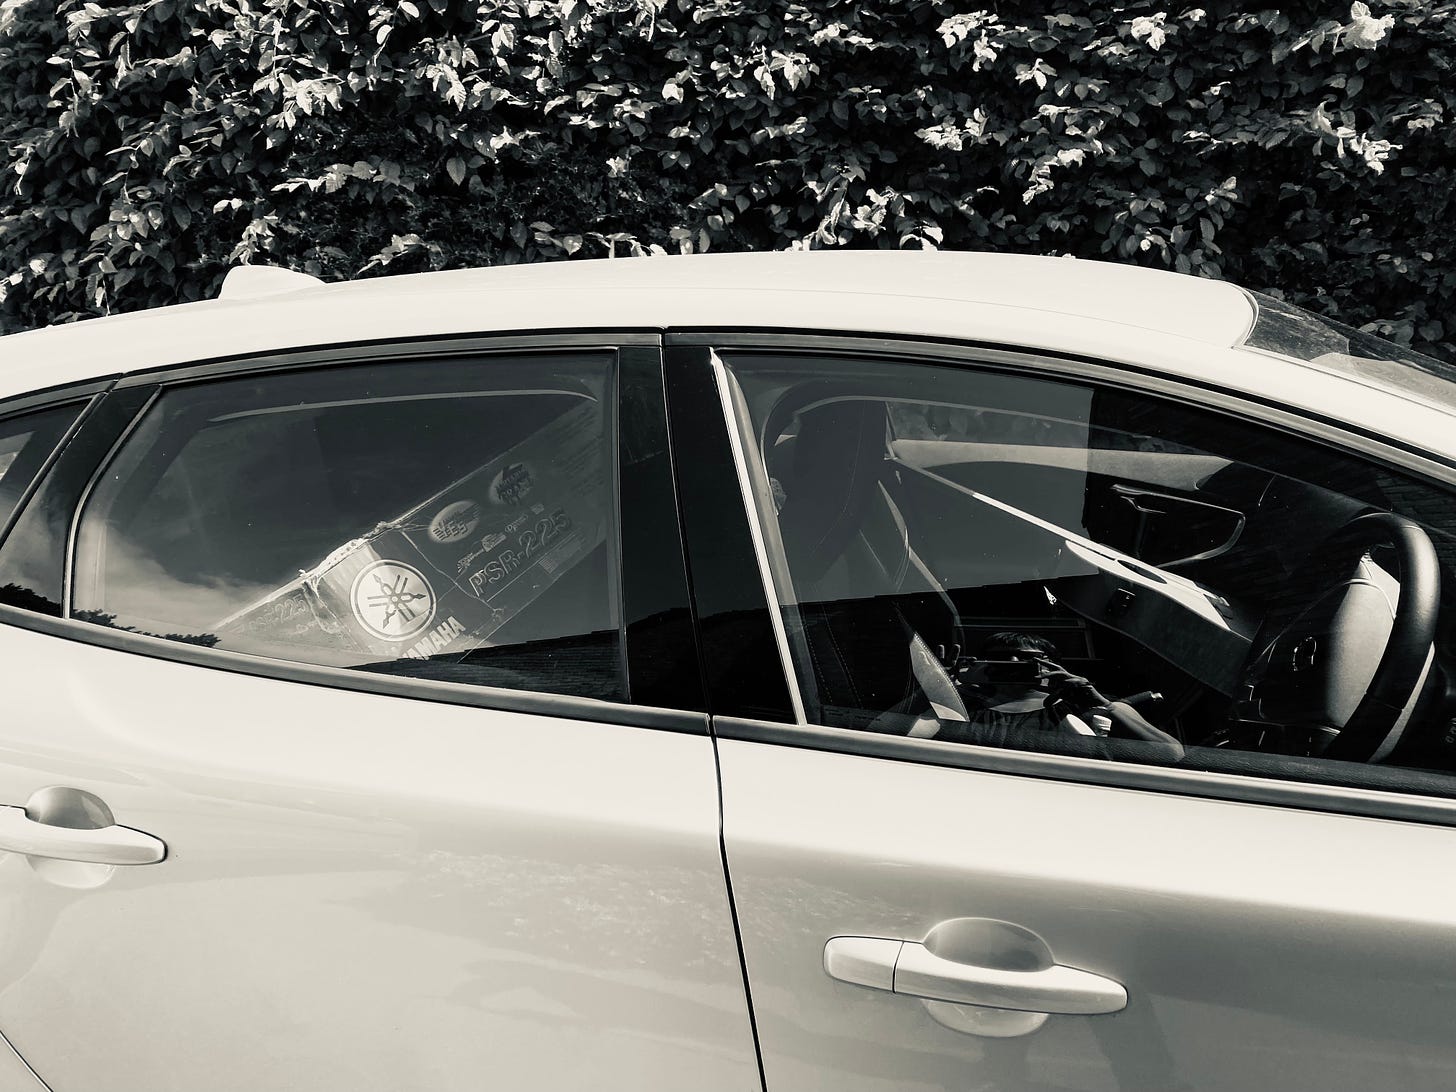 black and white photo of a car, with a few possessions in - just the things they could carry out of the house without 'dad' noticing when they left. A guitar and a box with a keyboard in are visible.